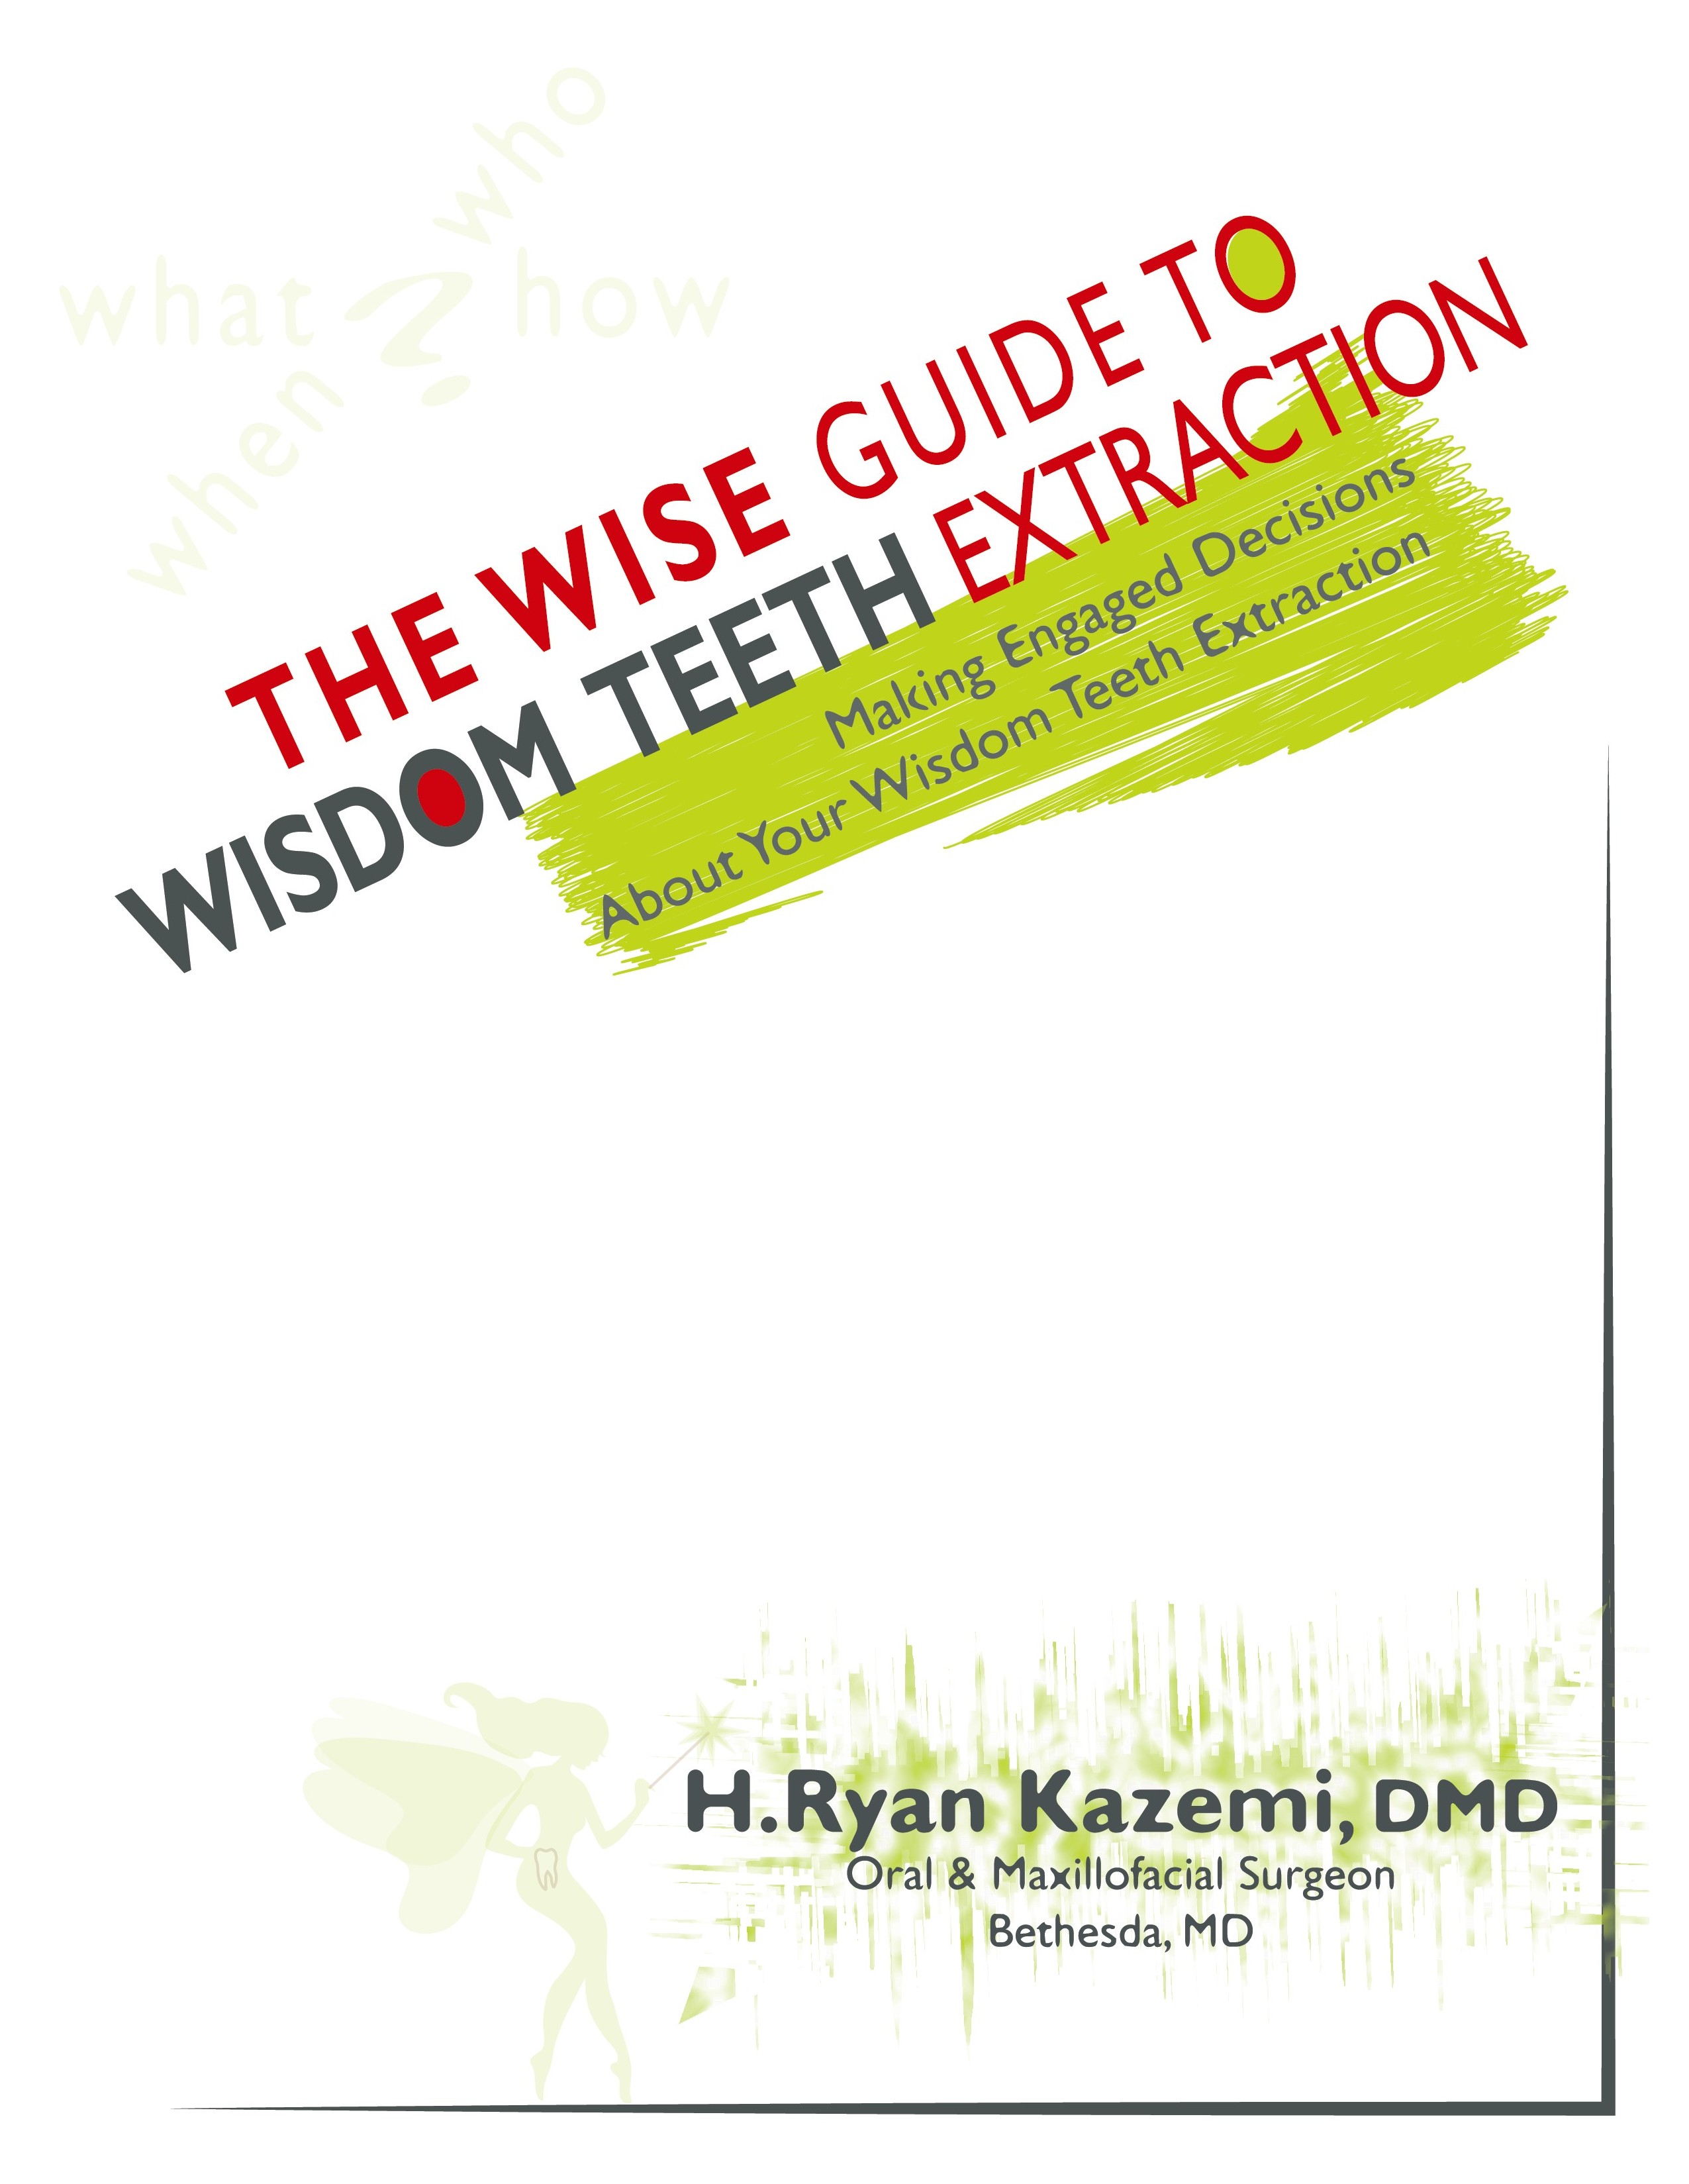 "The Wise Guide to Wisdom Teeth Extraction"